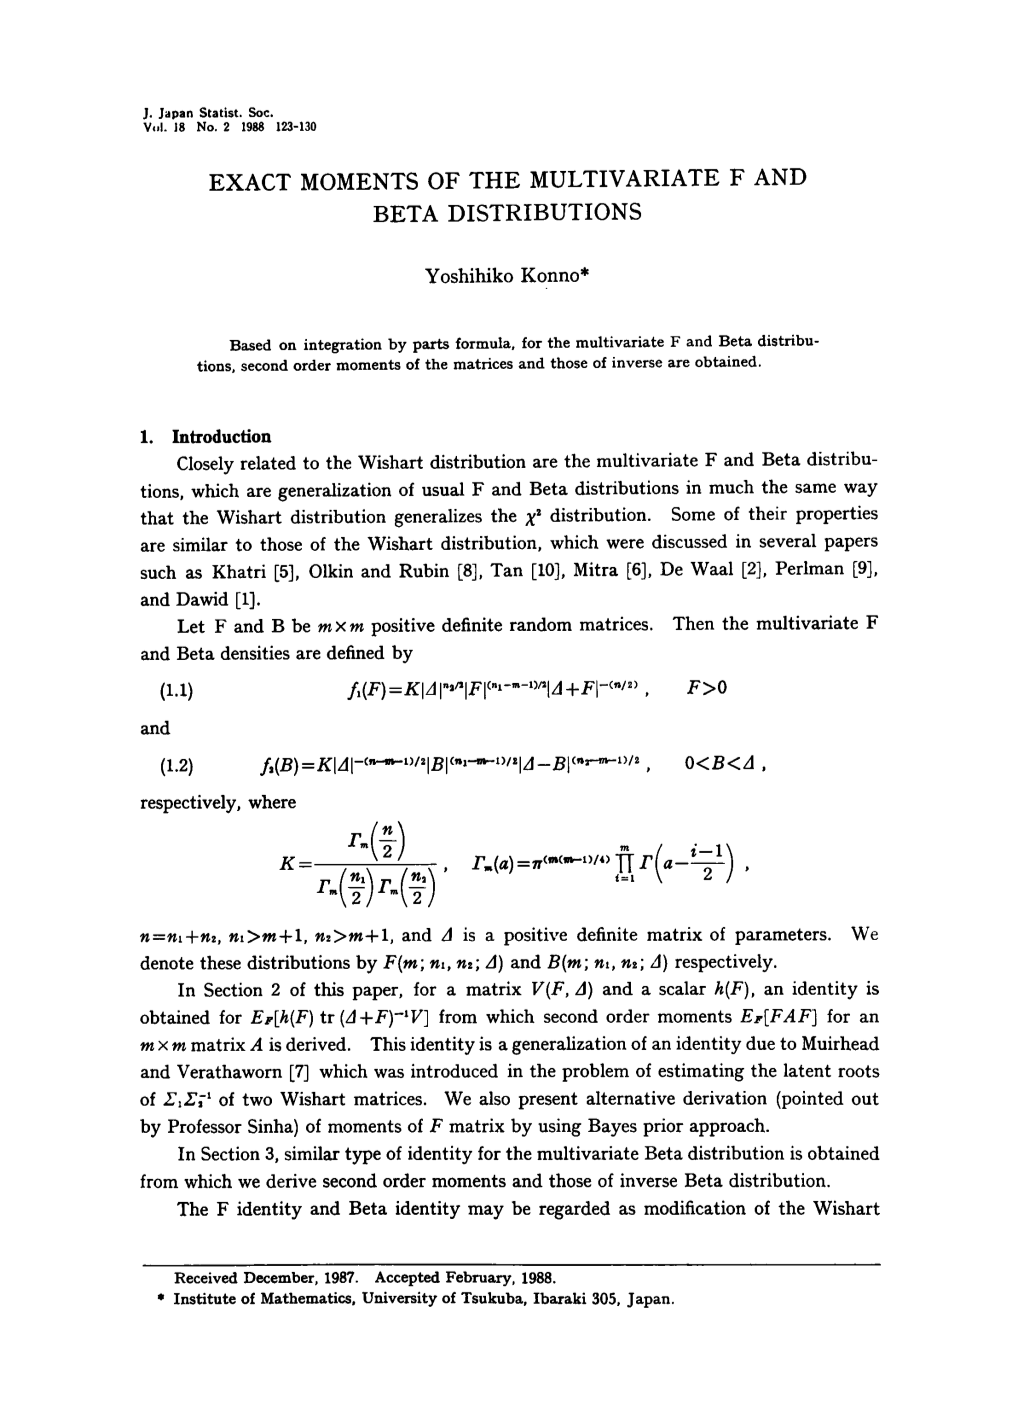 Exact Moments of the Multivariate F and Beta Distributions